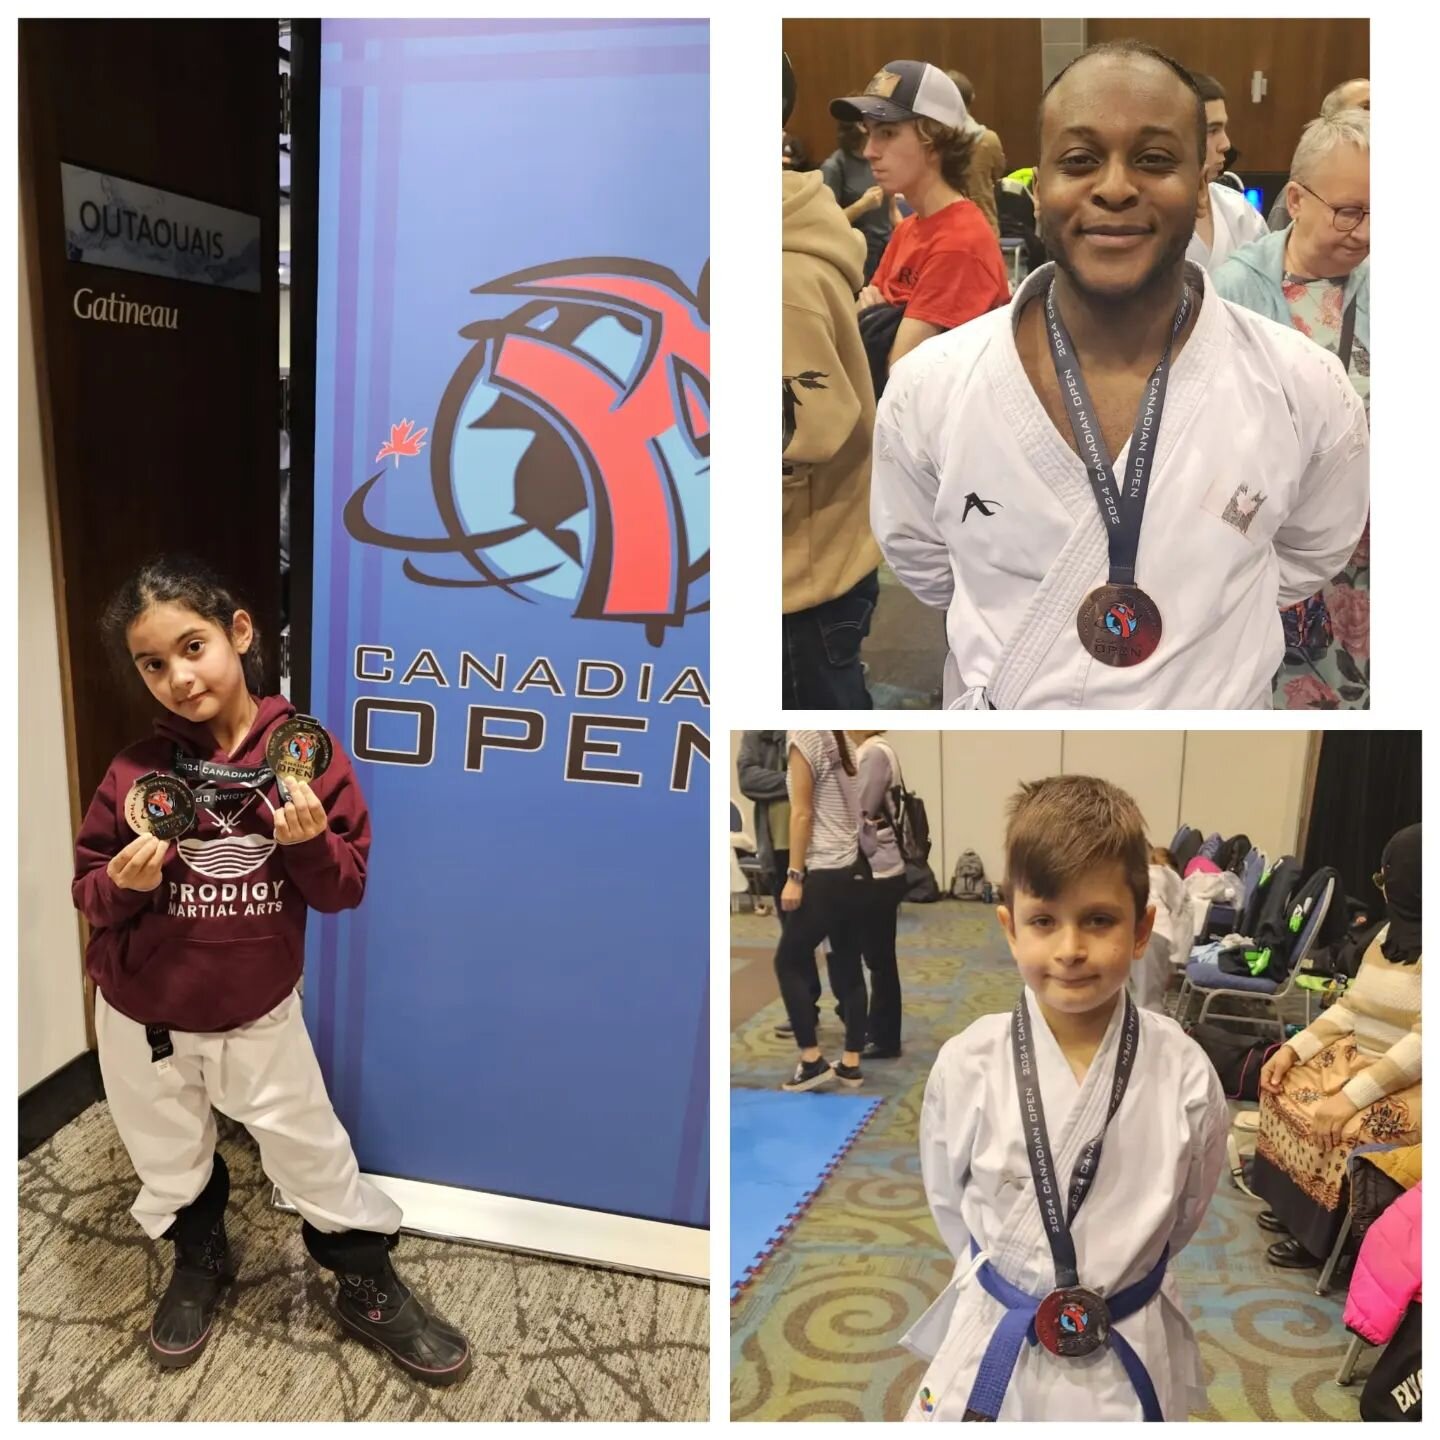 FANTASTIC WEEKEND FOR TEAM PRODIGY
.
Saturday - Team Prodigy competed at CANADIAN OPEN run by the amazing promoters @bernardokarate and @douvrismartialarts our team walked away with:
.
🥇x 2
🥈x 1
🥉x 1
.
Sunday - Kumite Training with Olympic Athlete